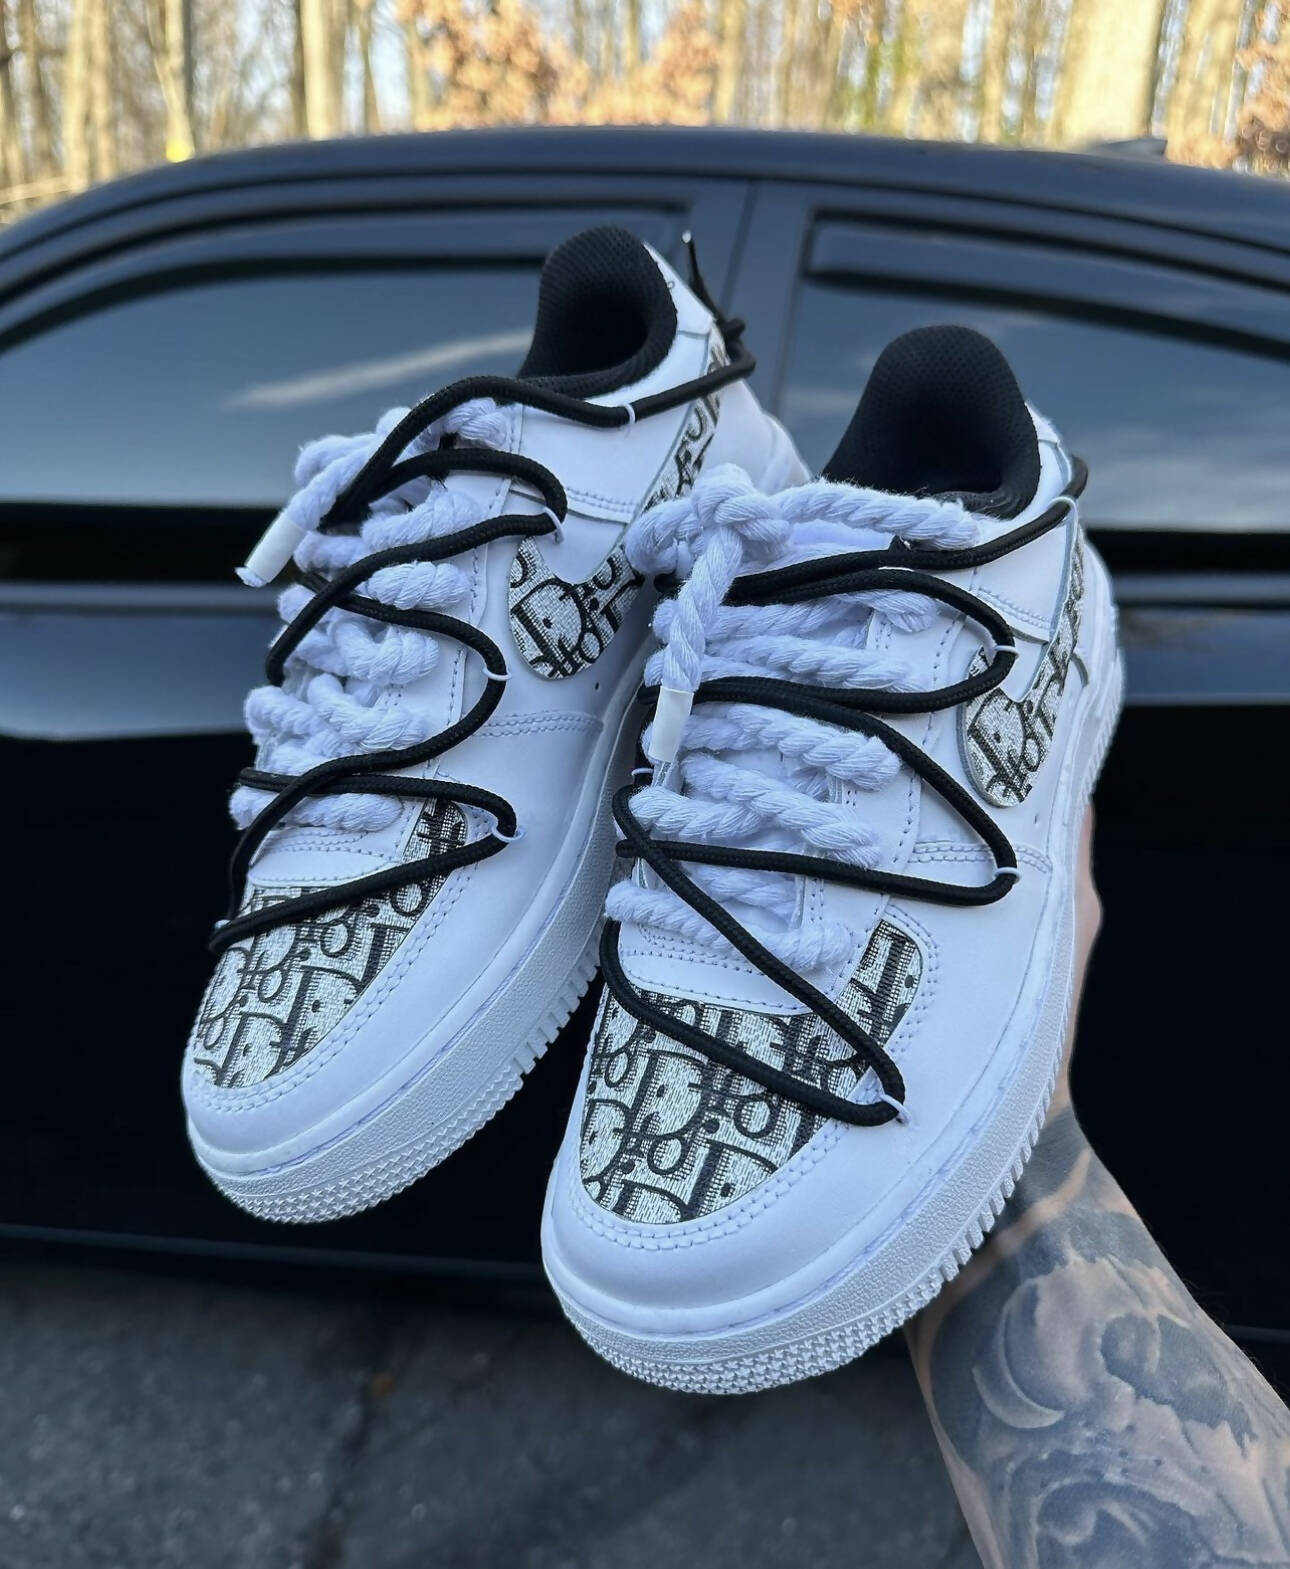 ‘Luxury Over-Lace’ Air Force 1’s